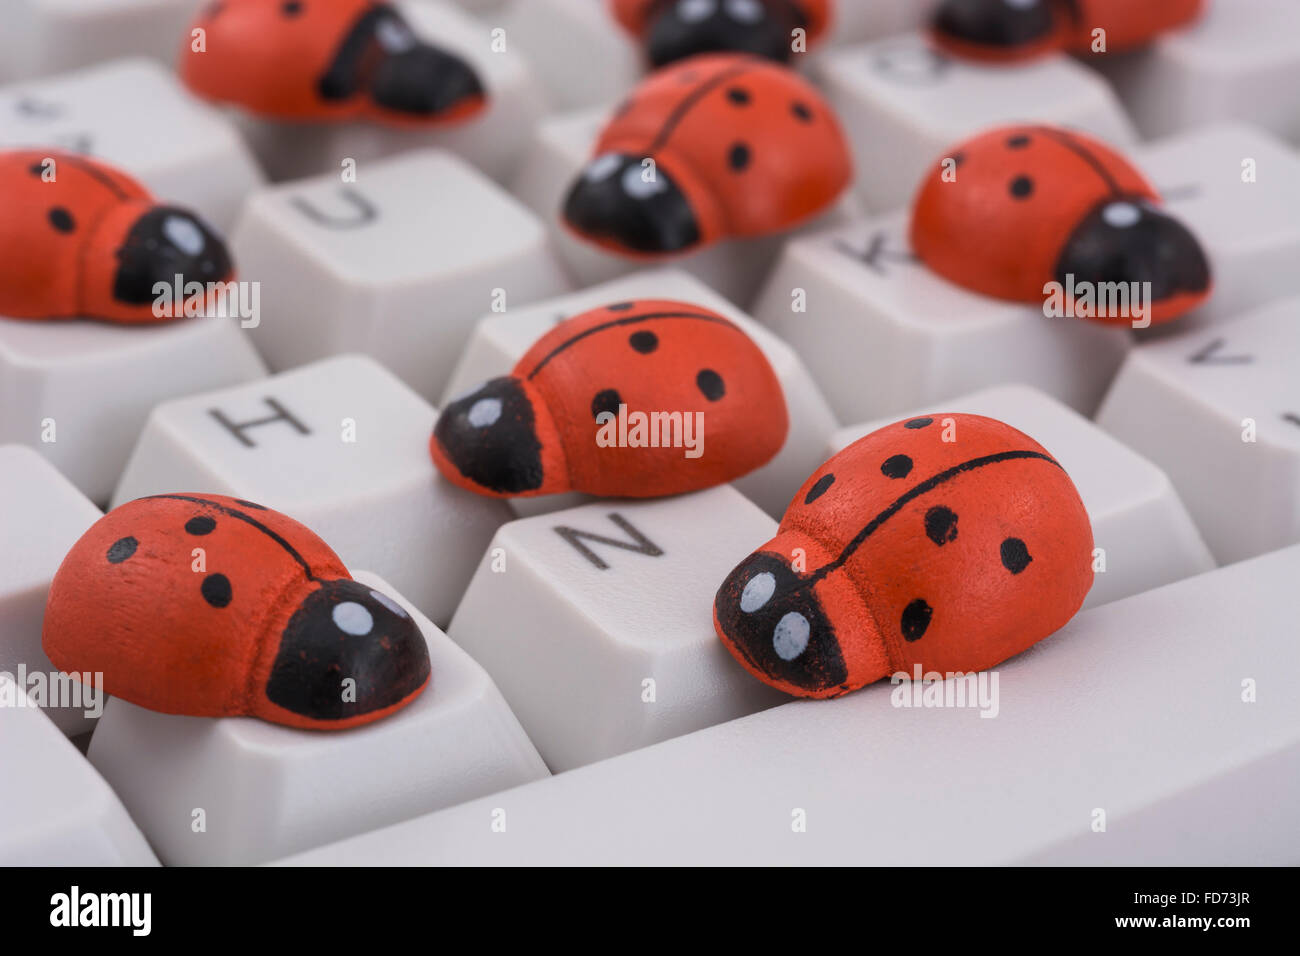 Ladybirds / ladybugs on PC keyboard - as a visual metaphor for the concept of 'computer bug' or viral / system 'infection'. Stock Photo